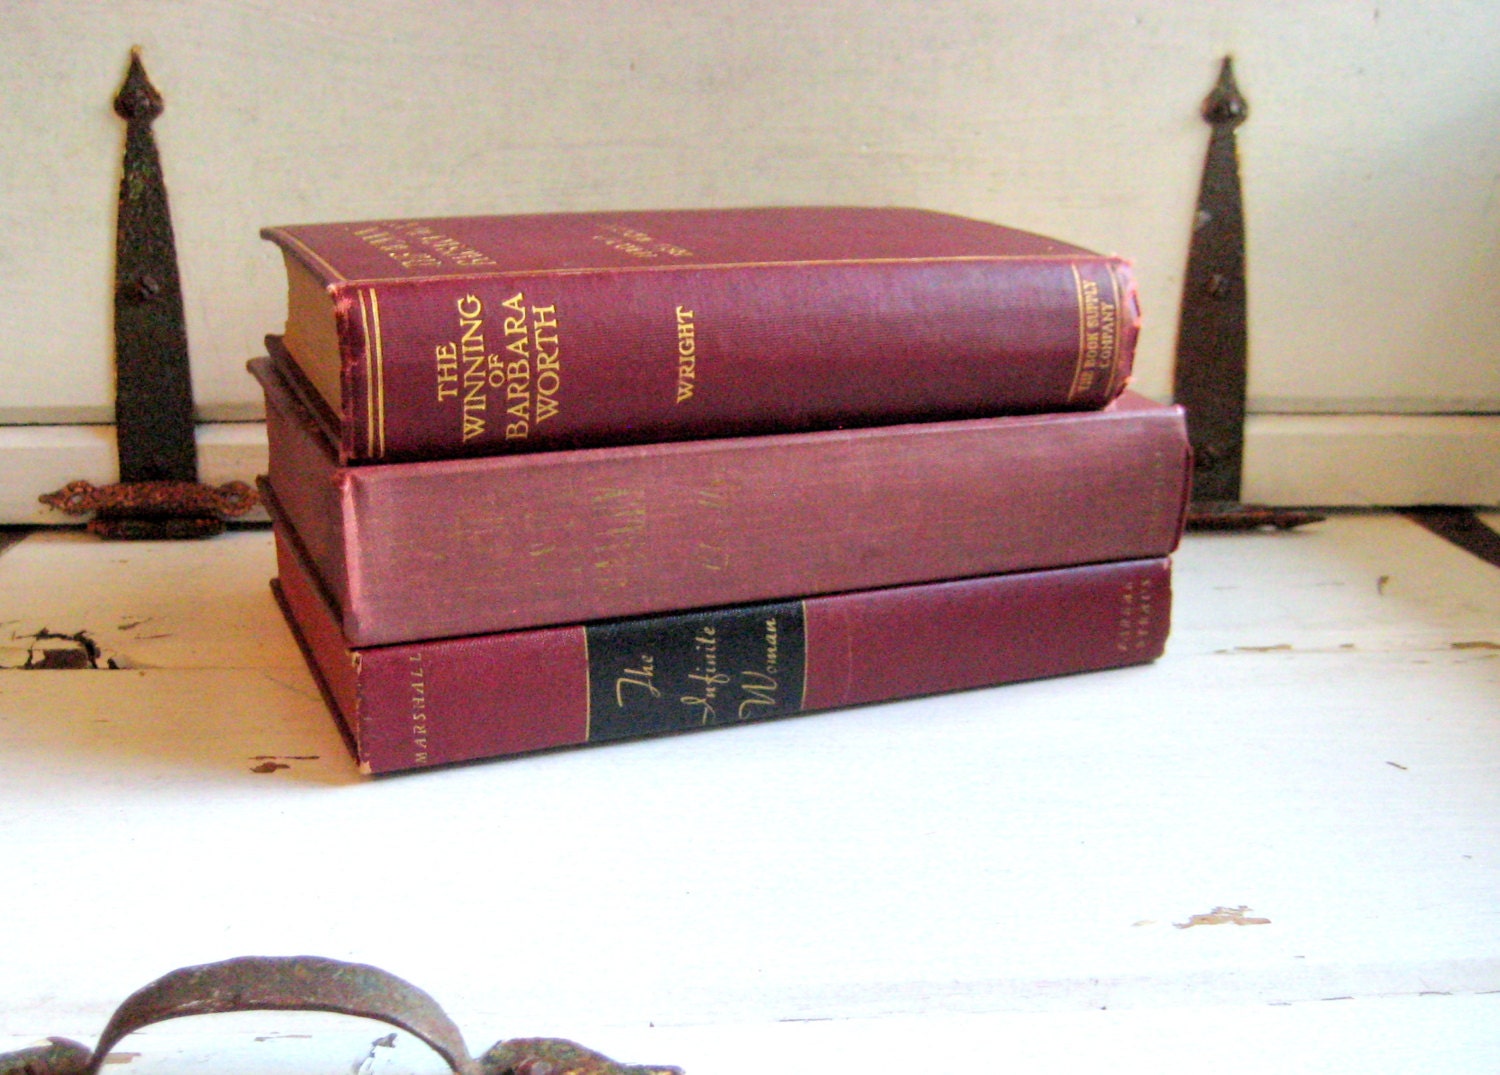 Shabby style vintage book collection, 3 burgundy and gold dramatic novels including How Green was my Valley - jensdreamvintage